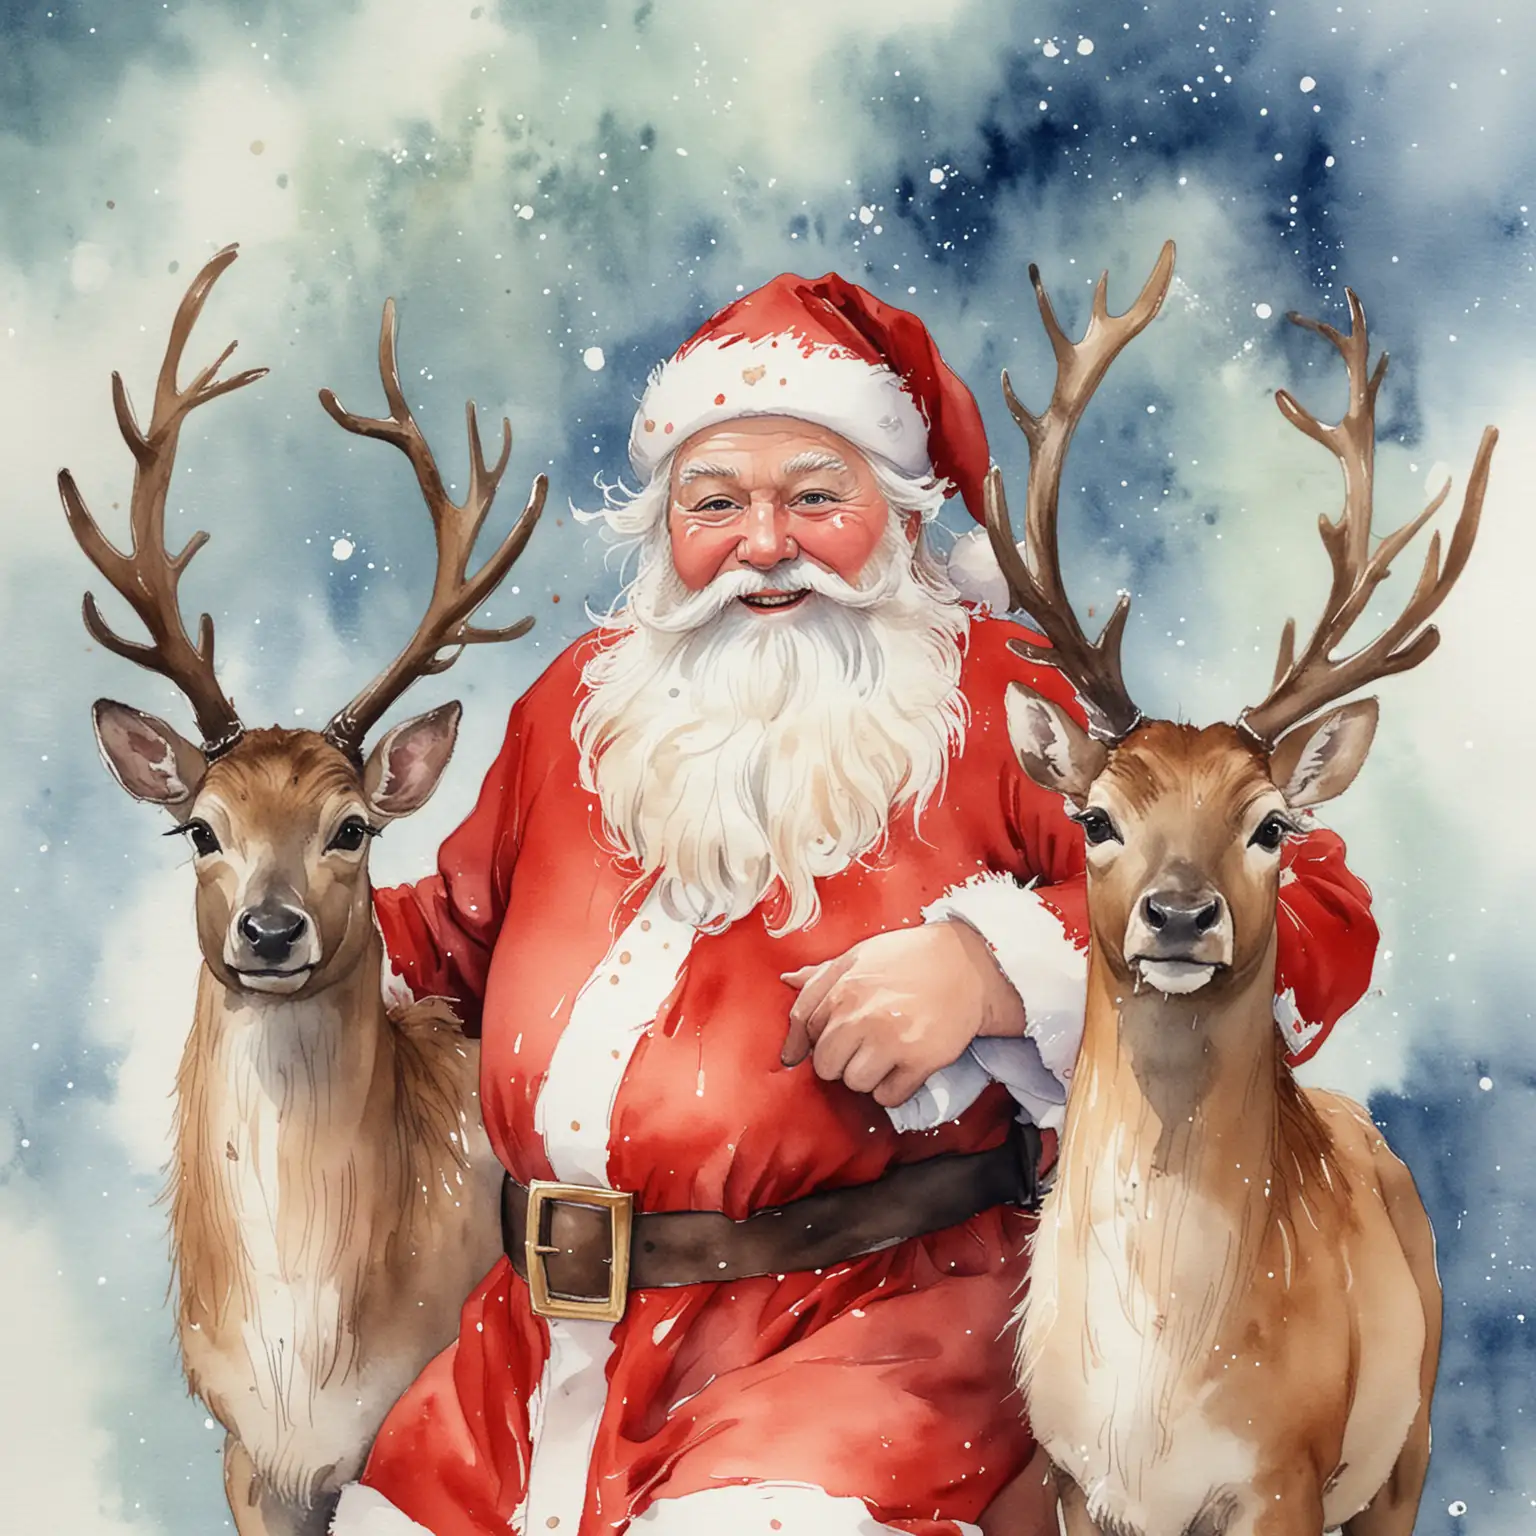 Santa Claus and Reindeer Enjoying a Merry Watercolor Celebration